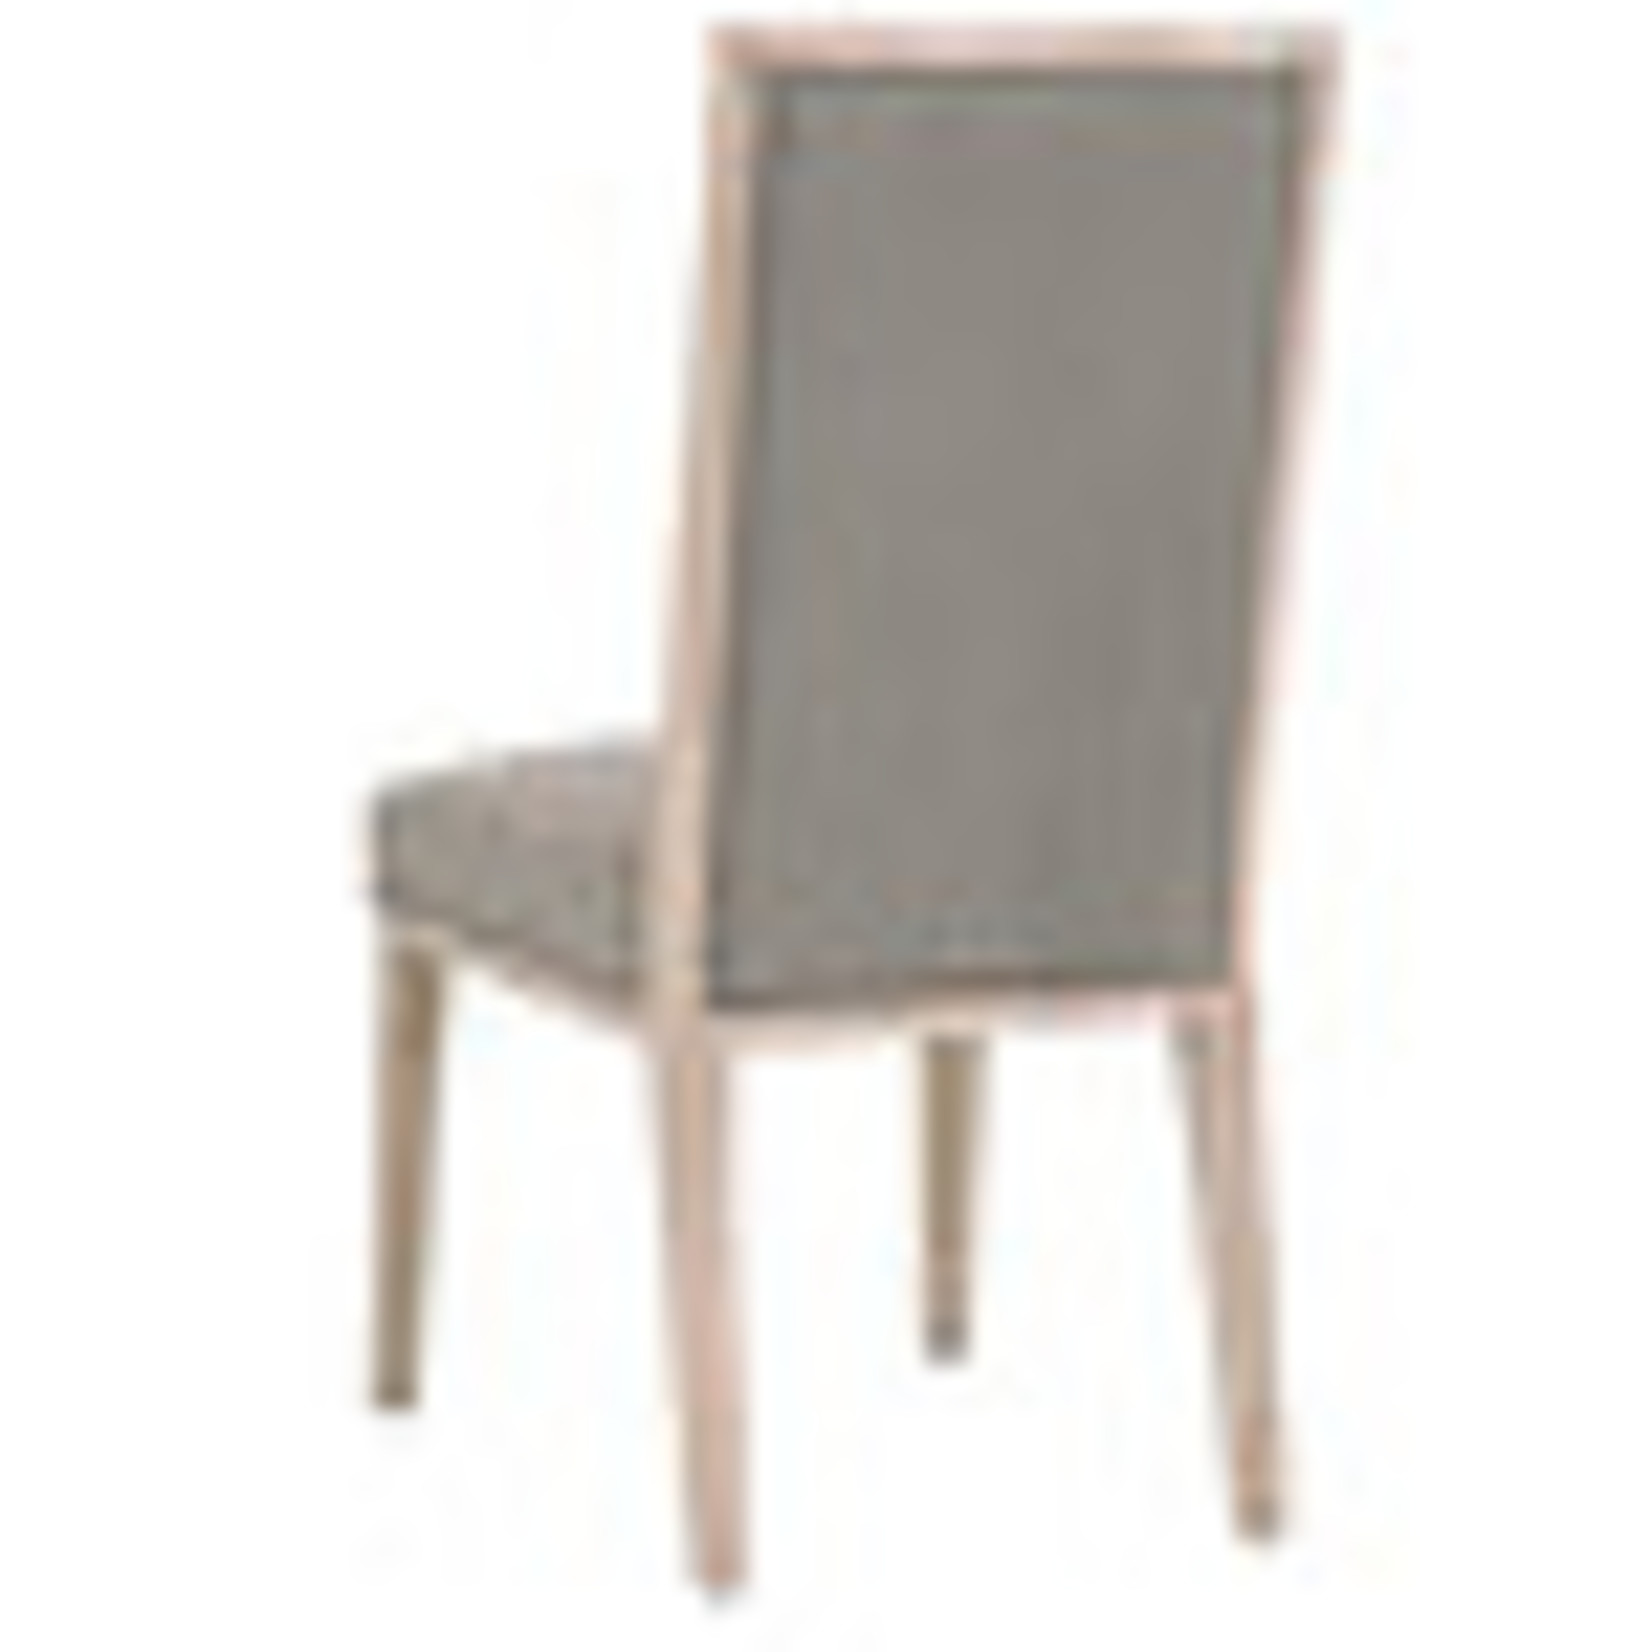 Martin Dining Chair